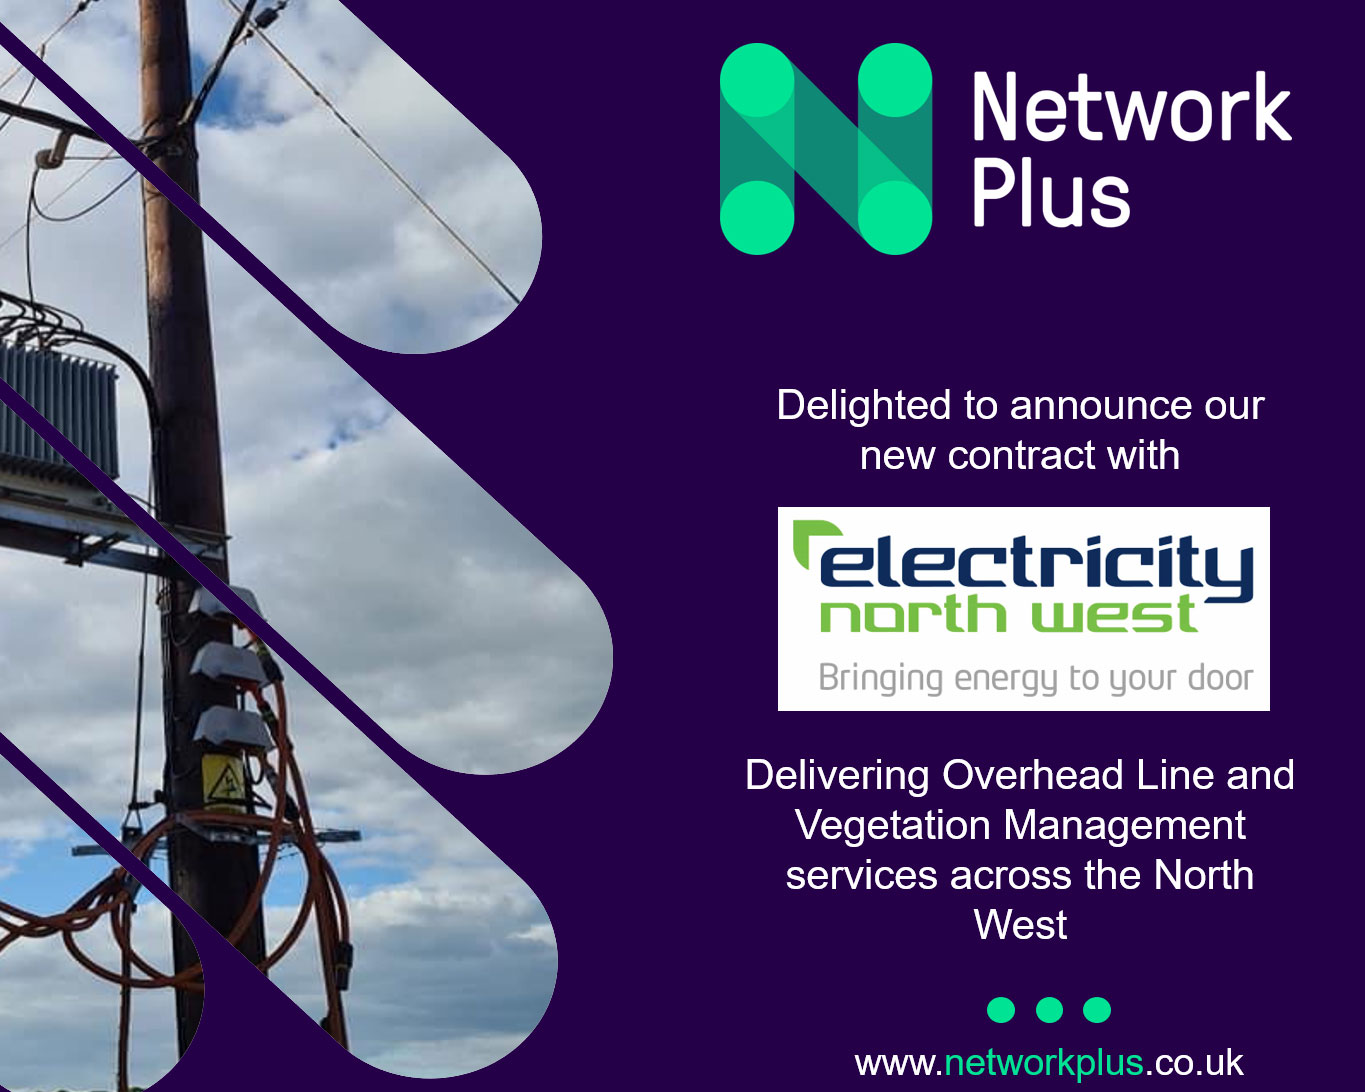 contract with electricity north west